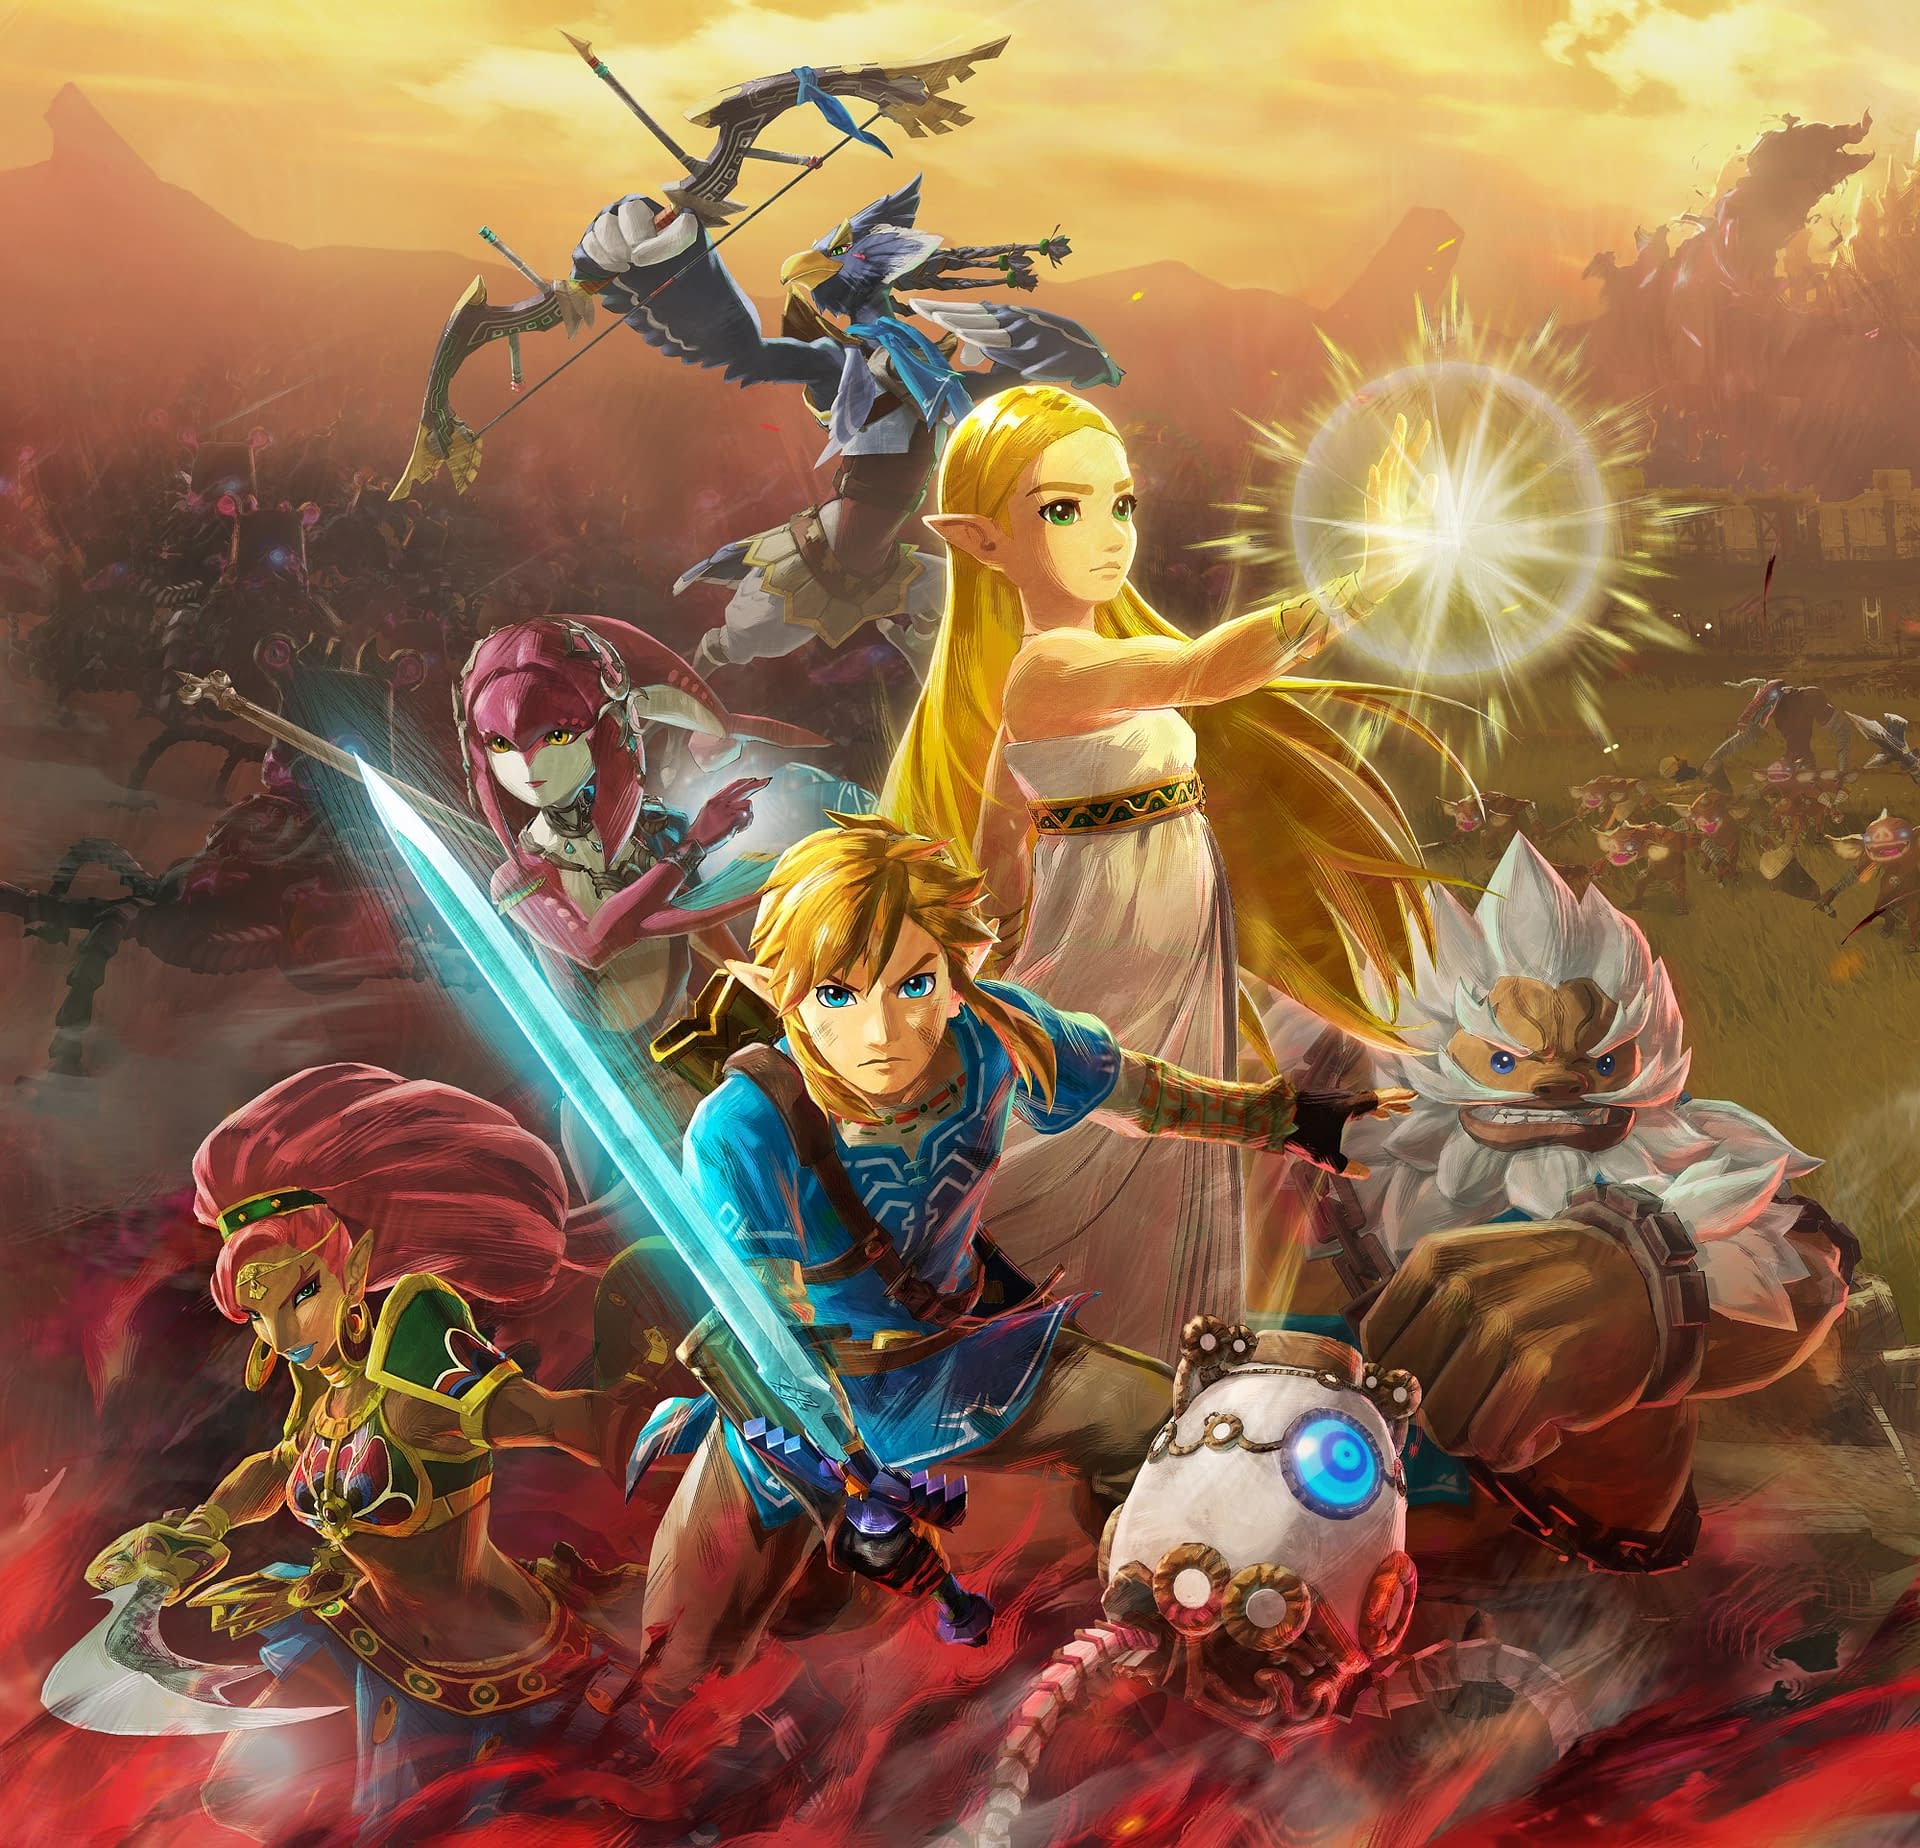 Nintendo Switch surprise as new Hyrule Warriors game based on Breath of the  Wild revealed, Gaming, Entertainment